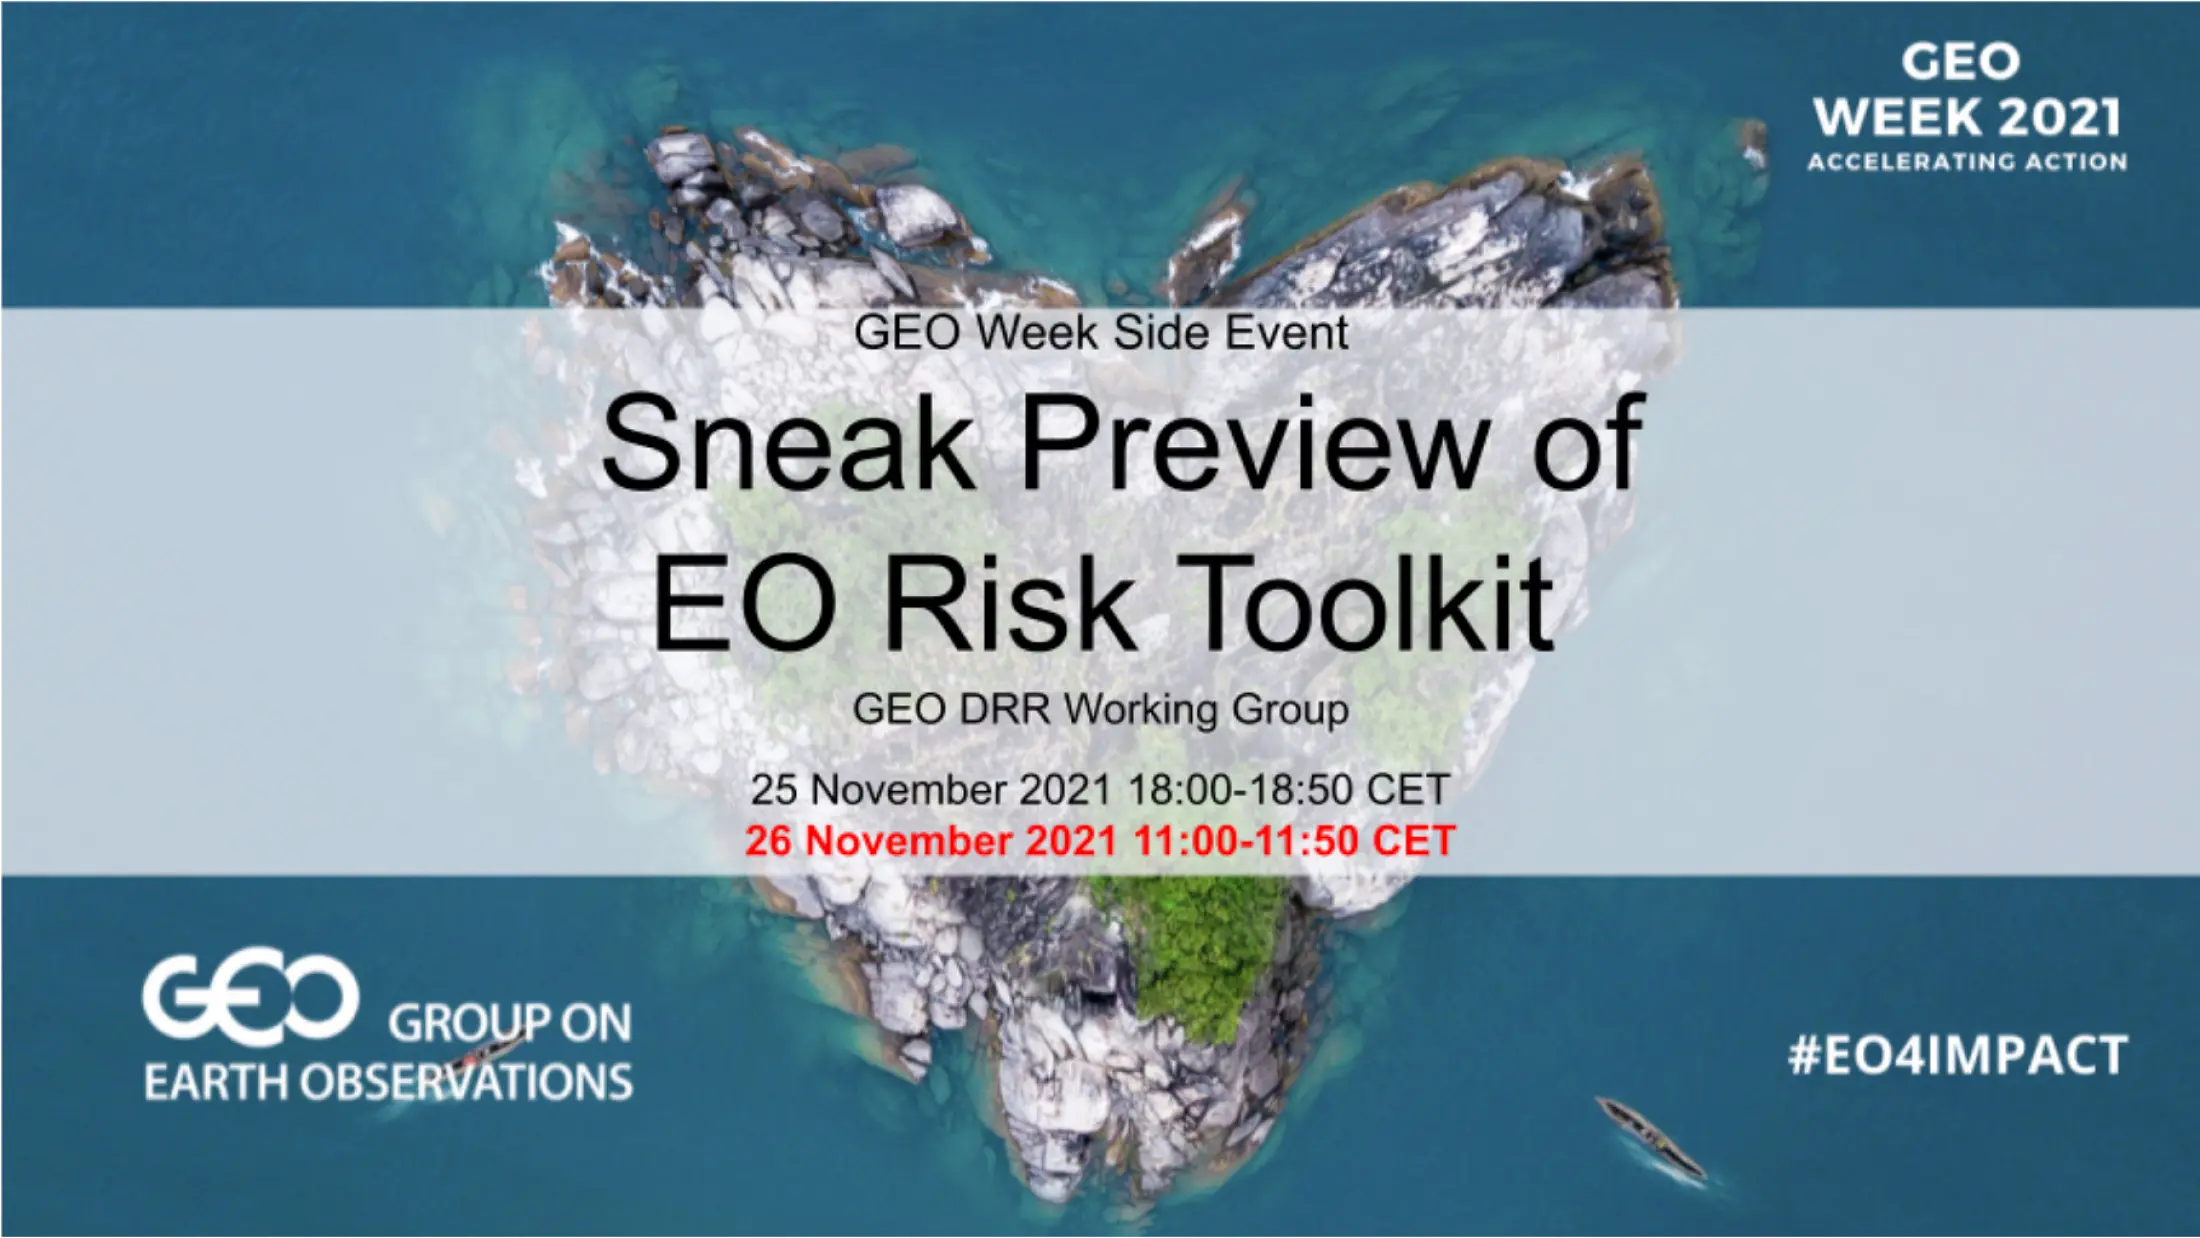 Insights from the ‘Sneak Preview of EO Risk Toolkit’ side event GEO Week 2O21